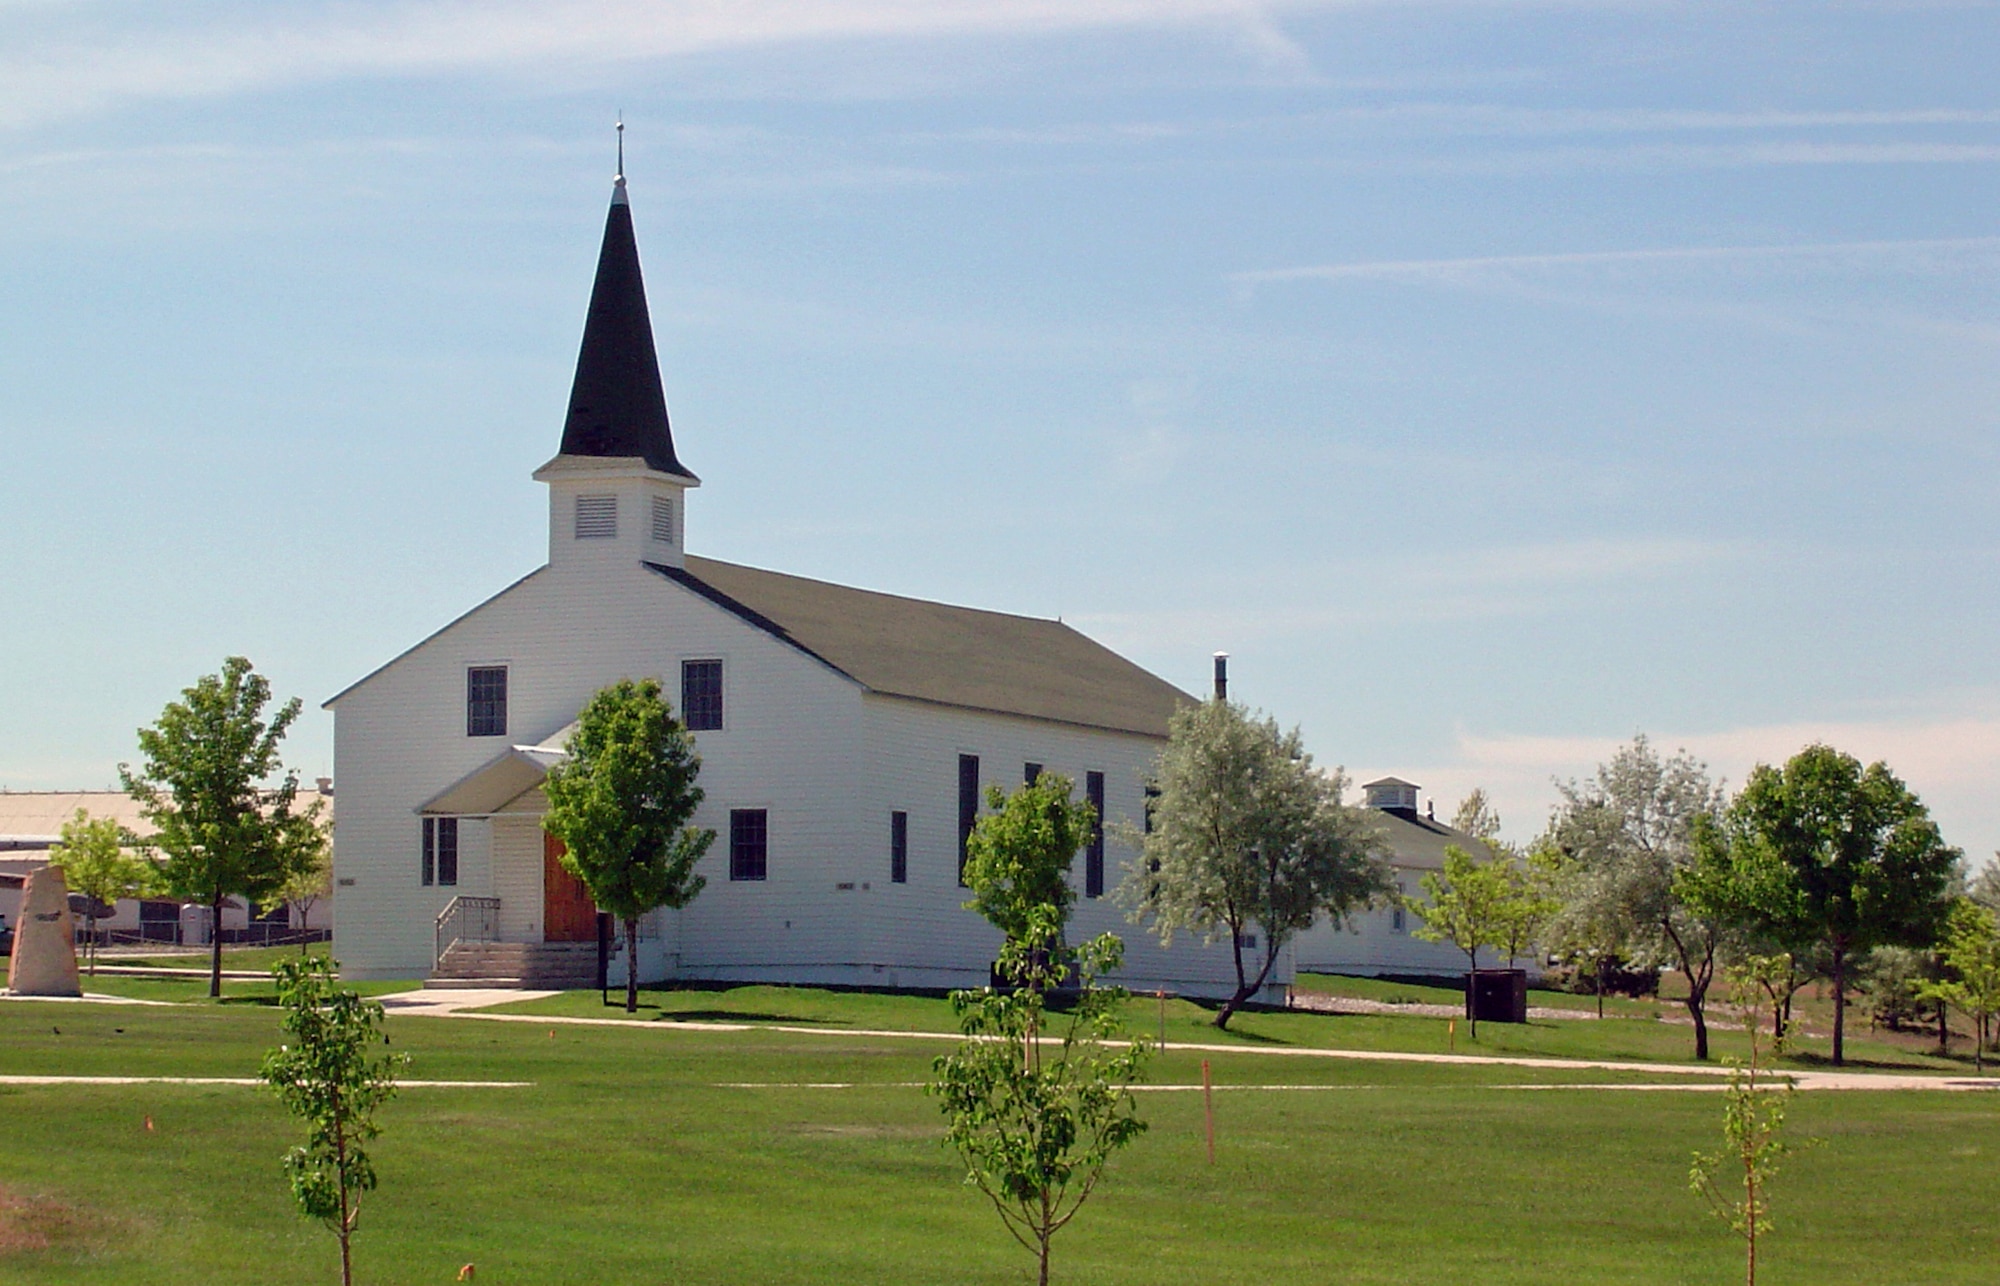 Today the original Hill Field Chapel stands majestically on the Hill Aerospace Museum grounds, retired from "active duty" as a religious facility, but still serving proudly. Private individuals and organizations sometimes rent the Chapel for weddings. (Courtesy Photo)